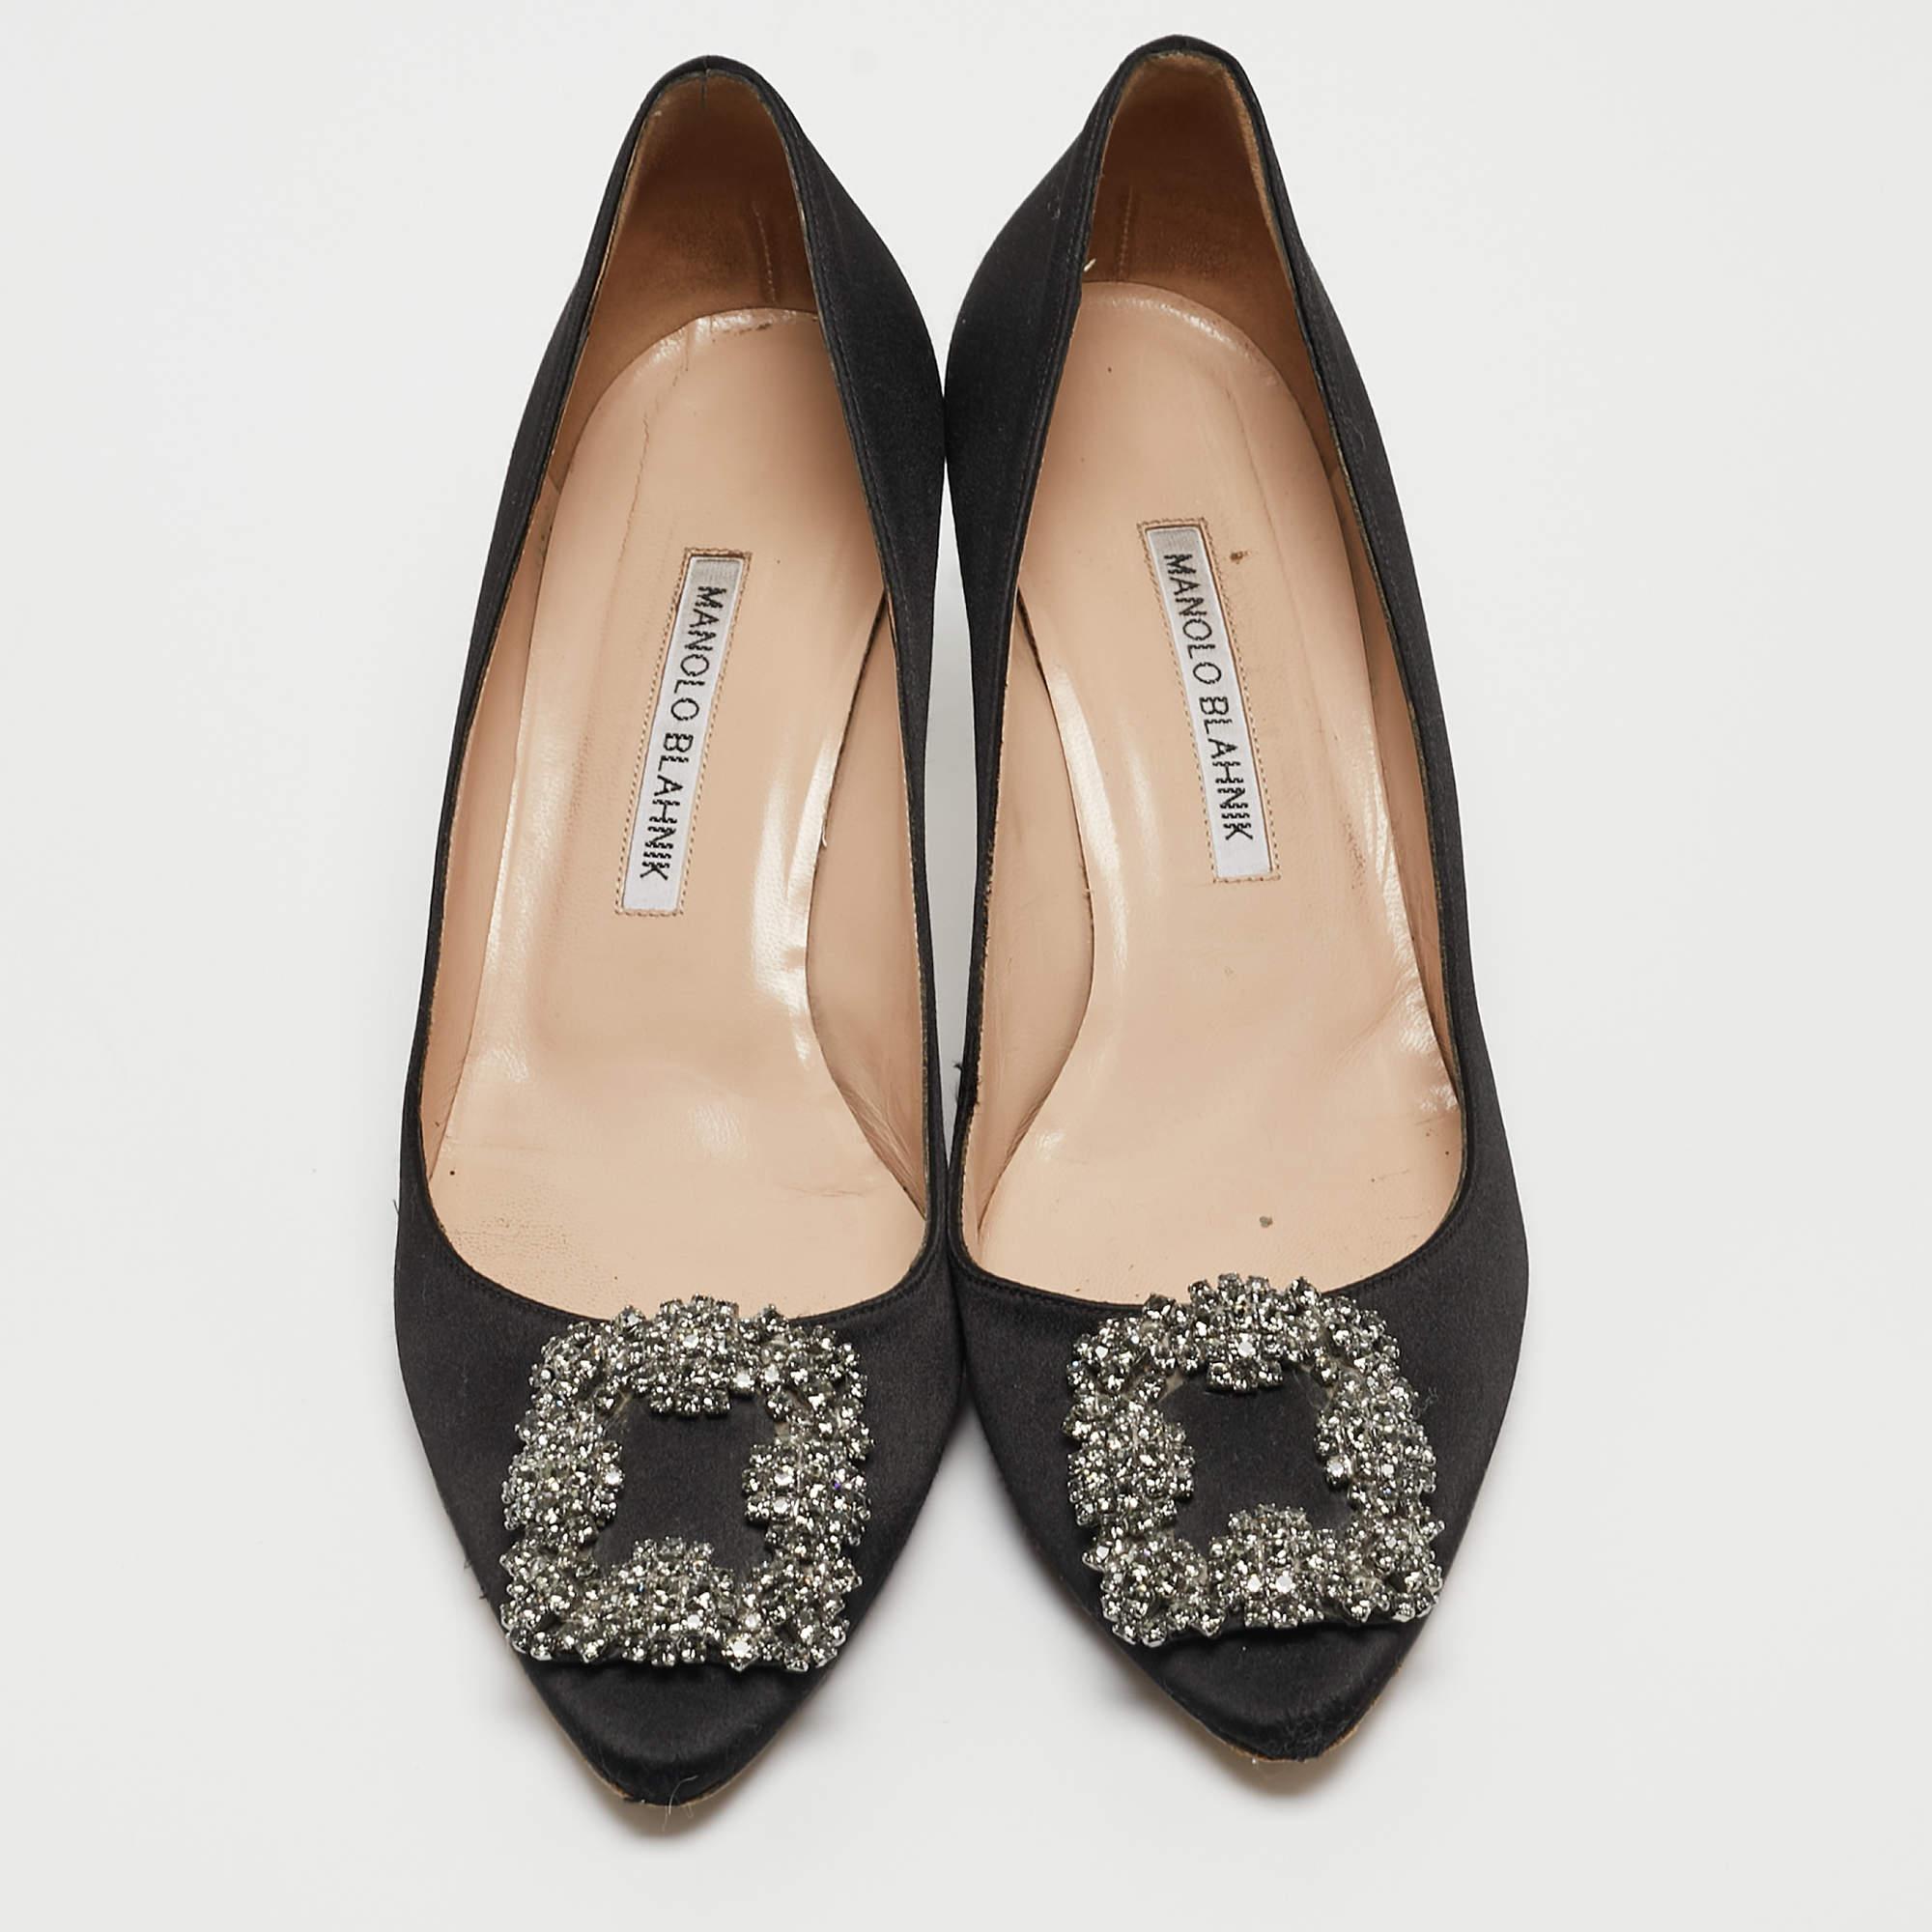 Manolo Blahnik is well-known for his graceful designs, and his label is synonymous with opulence, femininity, and elegance. These Hangisi pumps are crafted from satin into a pointed-toe silhouette augmented by the embellishments perched on the